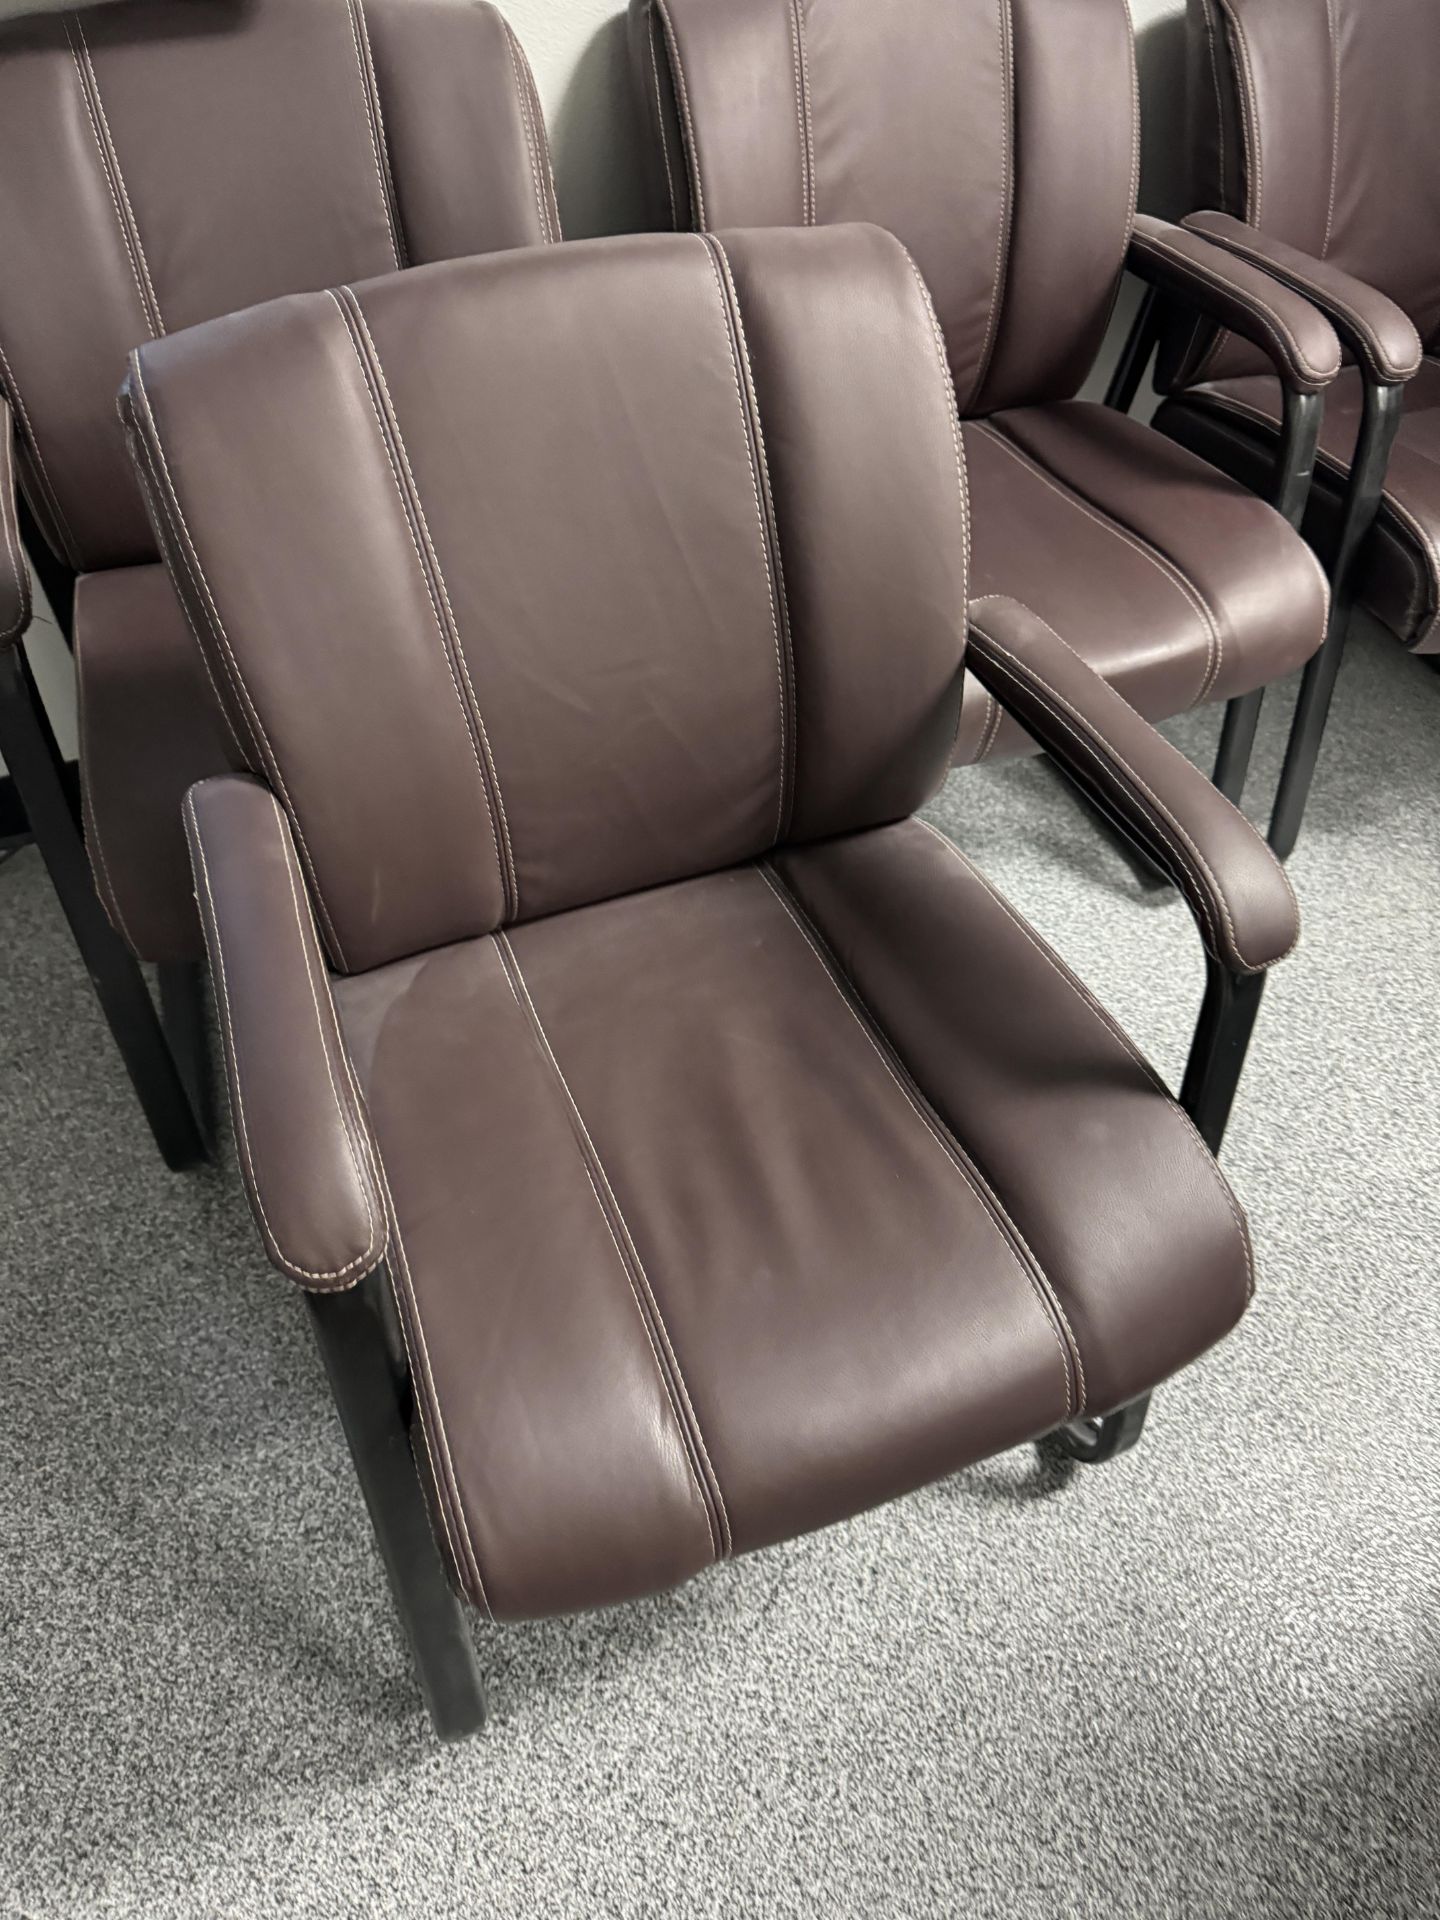 4 LEATHER CHAIRS - Image 2 of 2